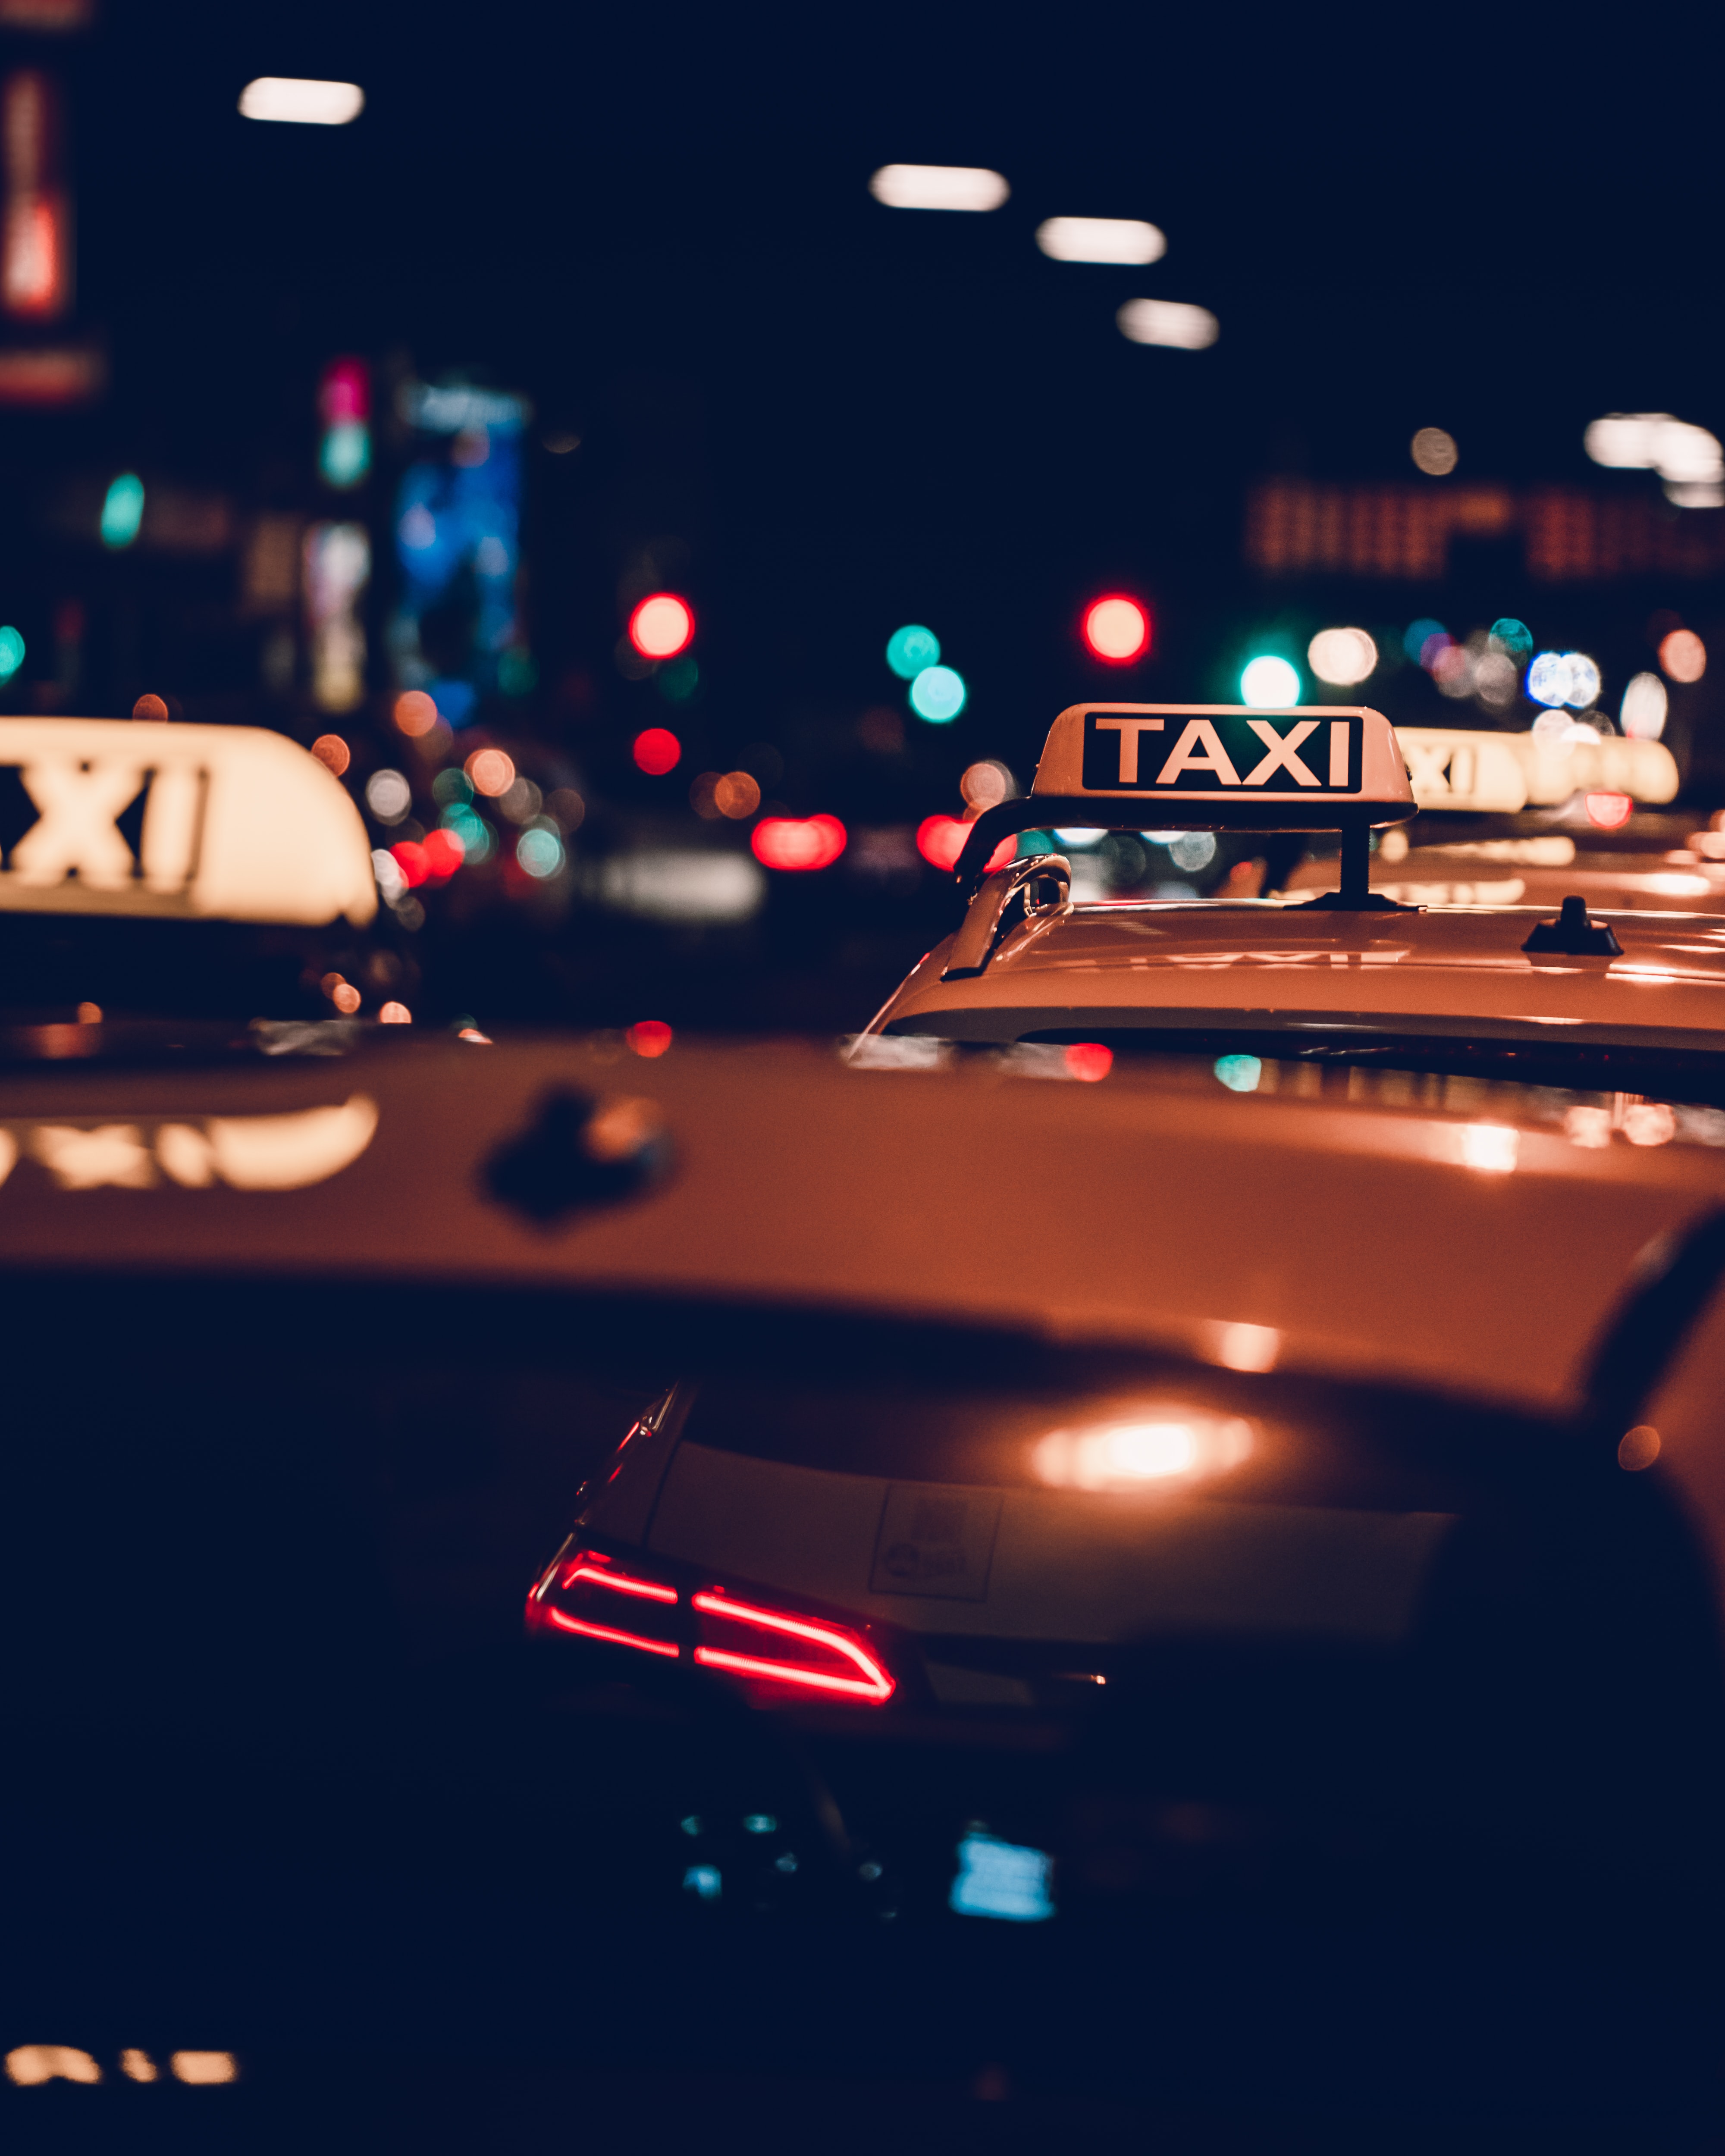 Taxi iPhone wallpapers